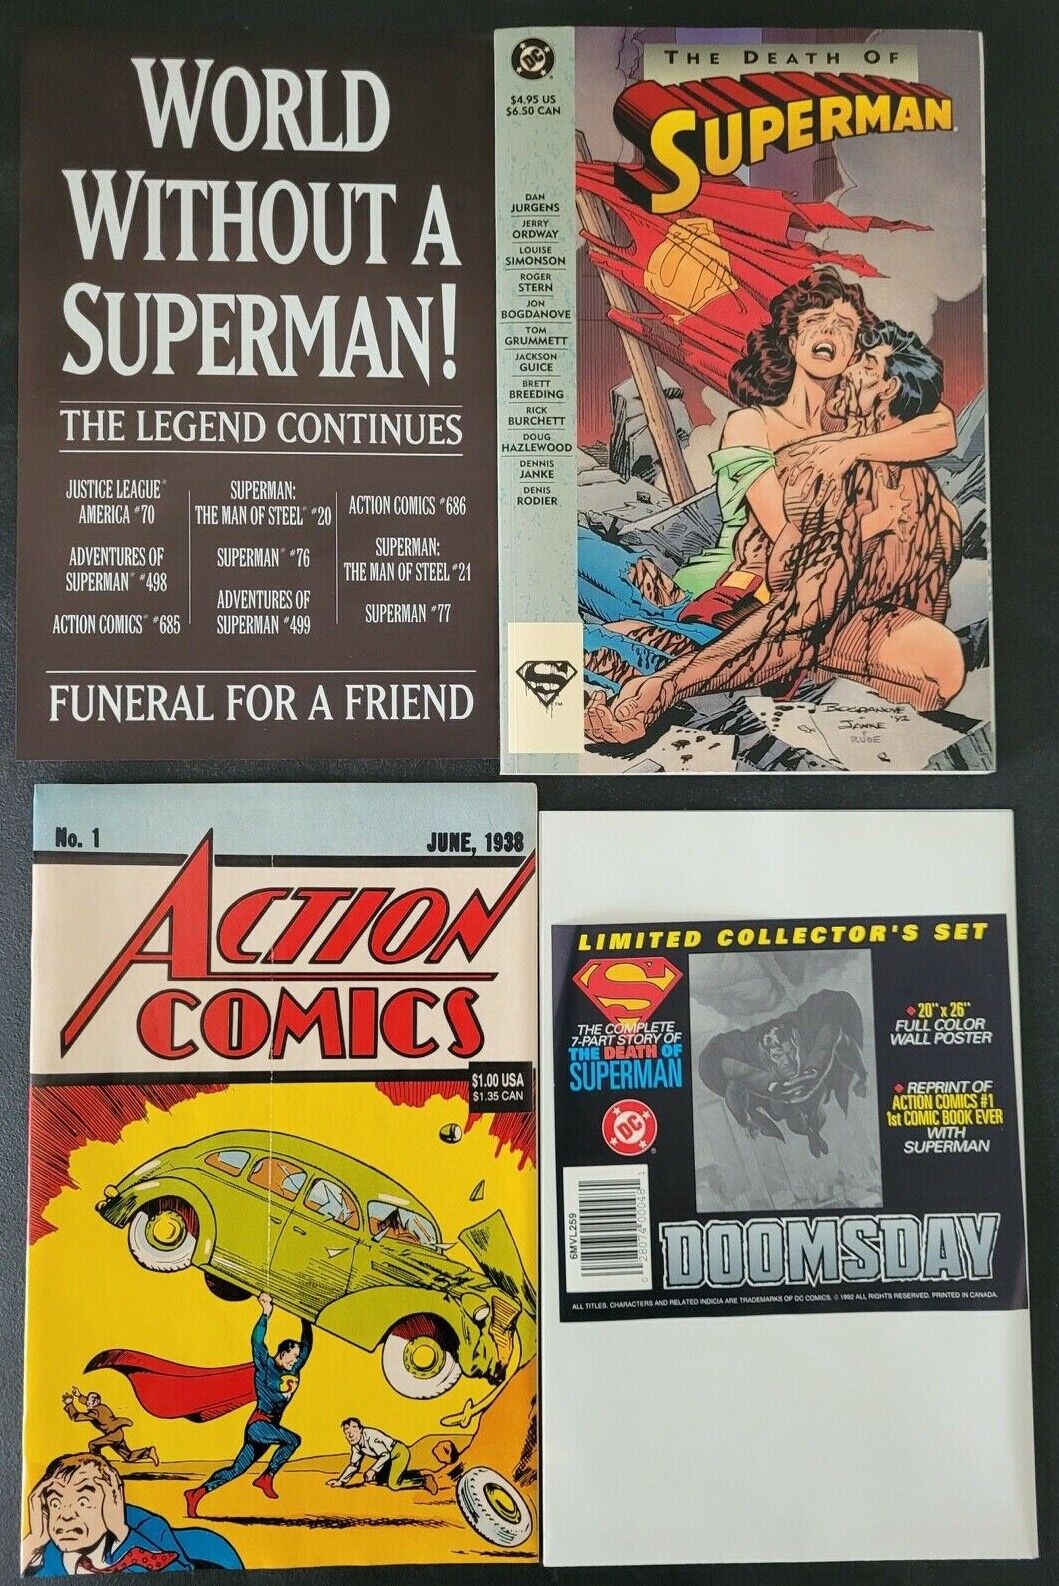 DOOMSDAY THE DEATH OF SUPERMAN LIMITED COLLECTORS SET 1993 ACTION COMICS #1 TPB